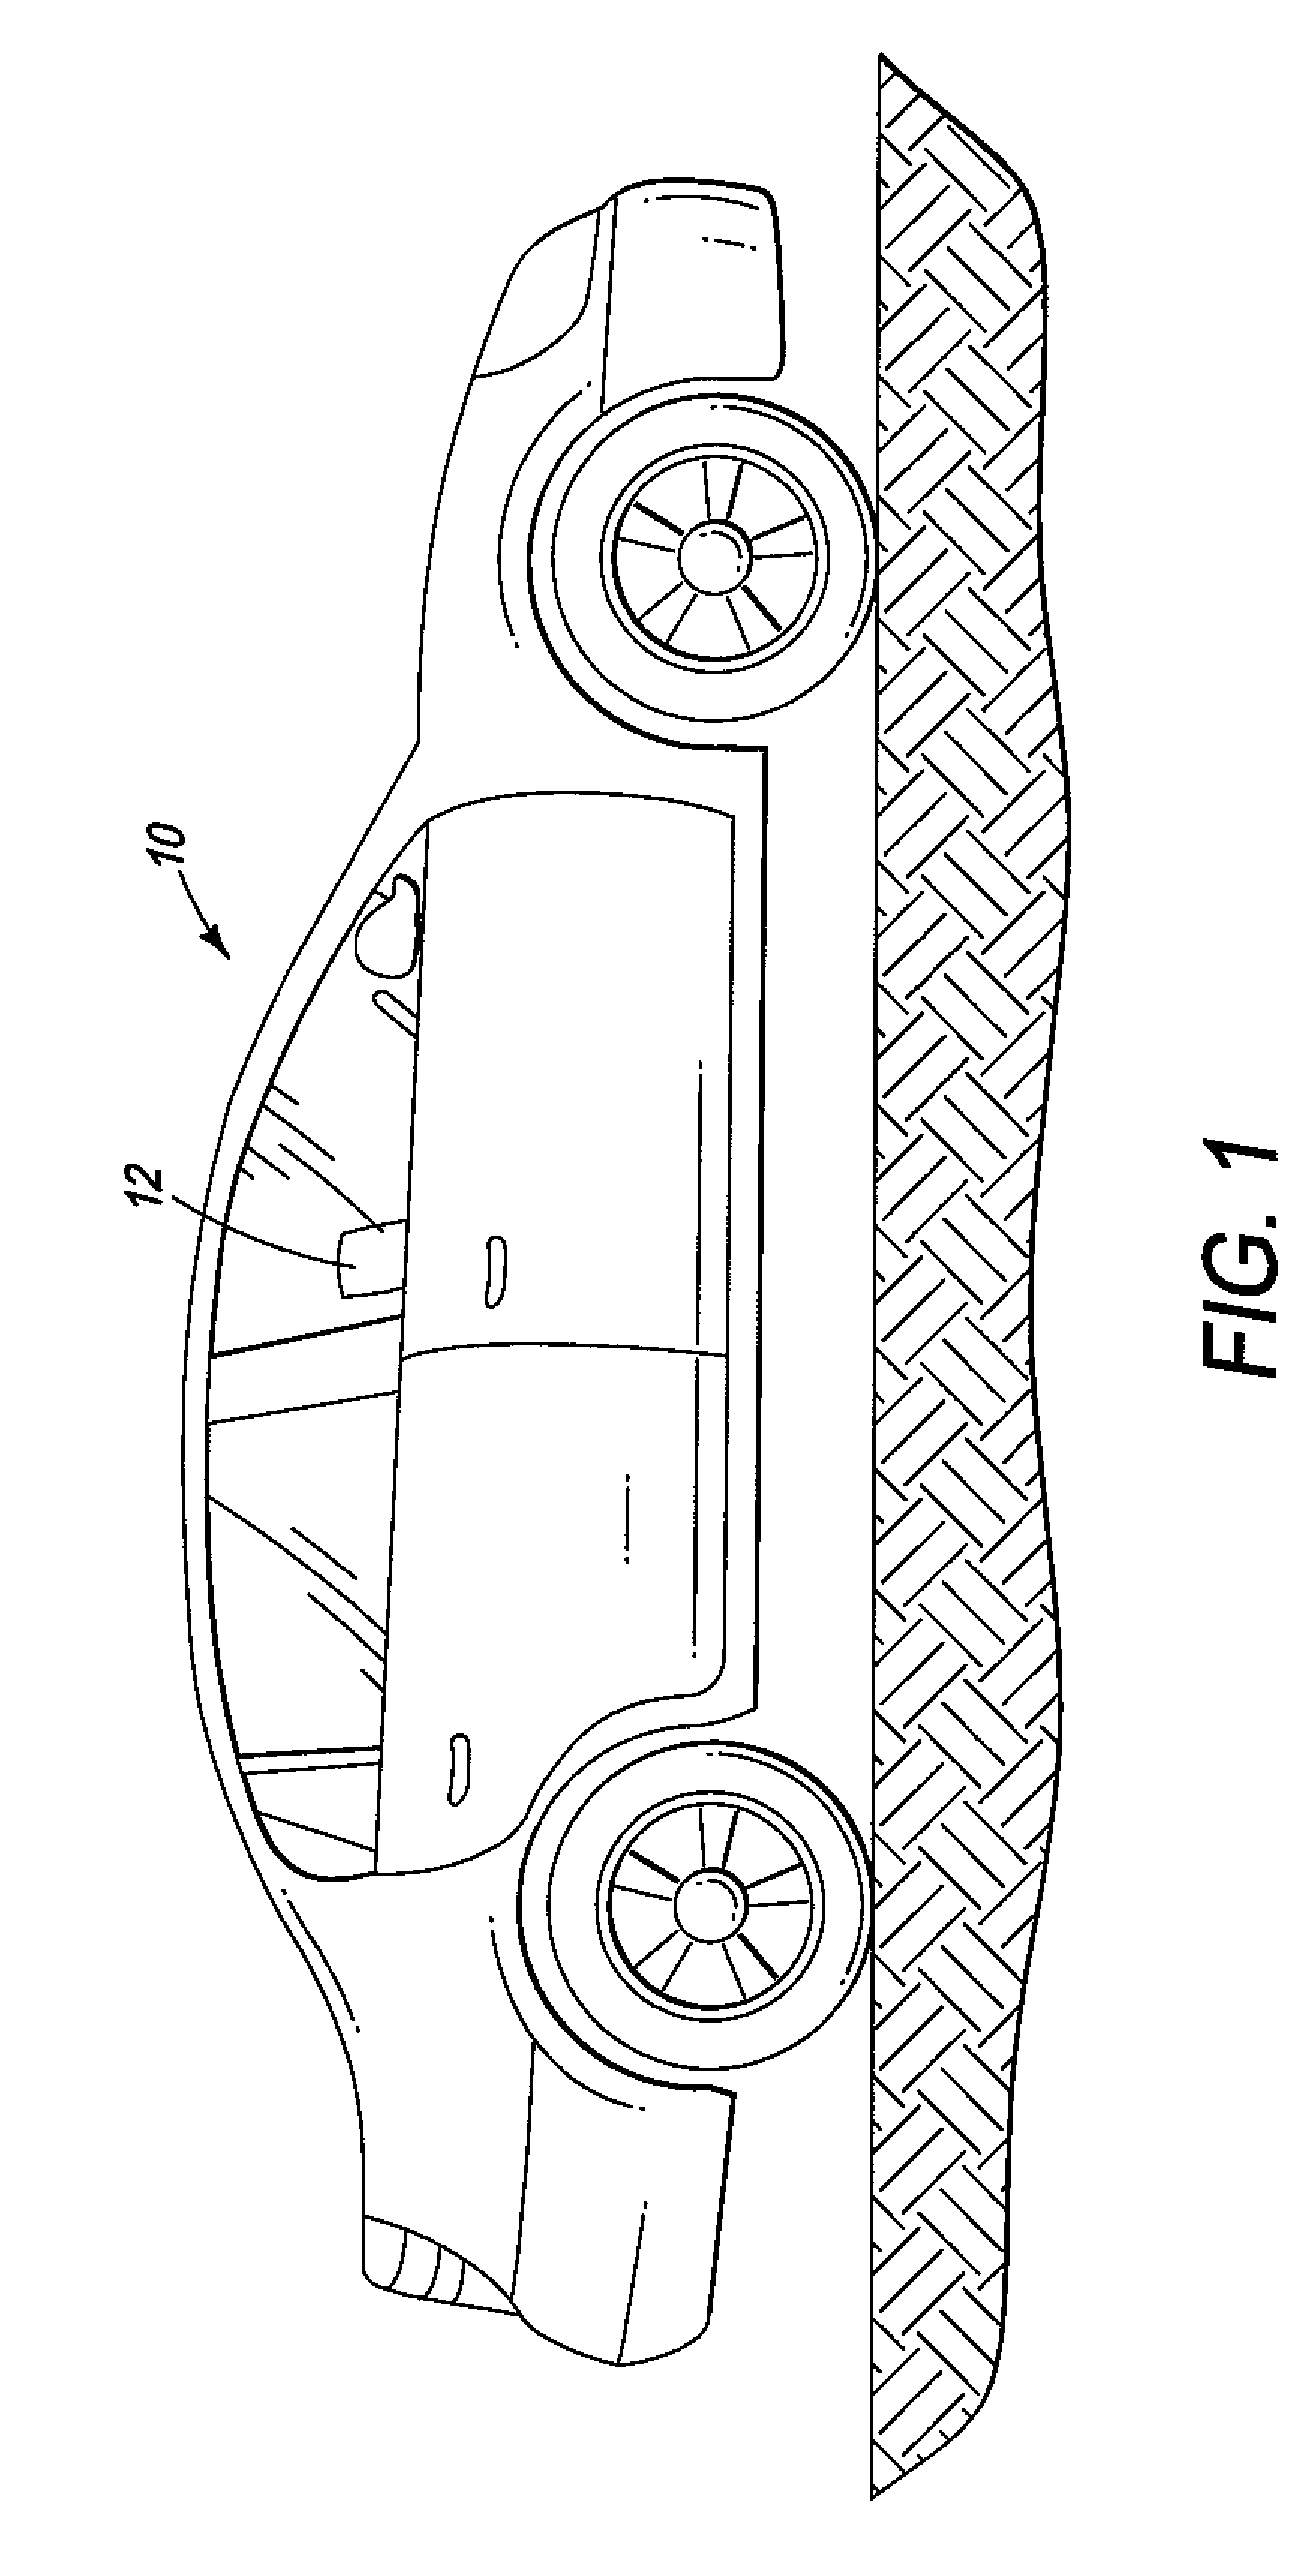 Vehicle occupant classification system